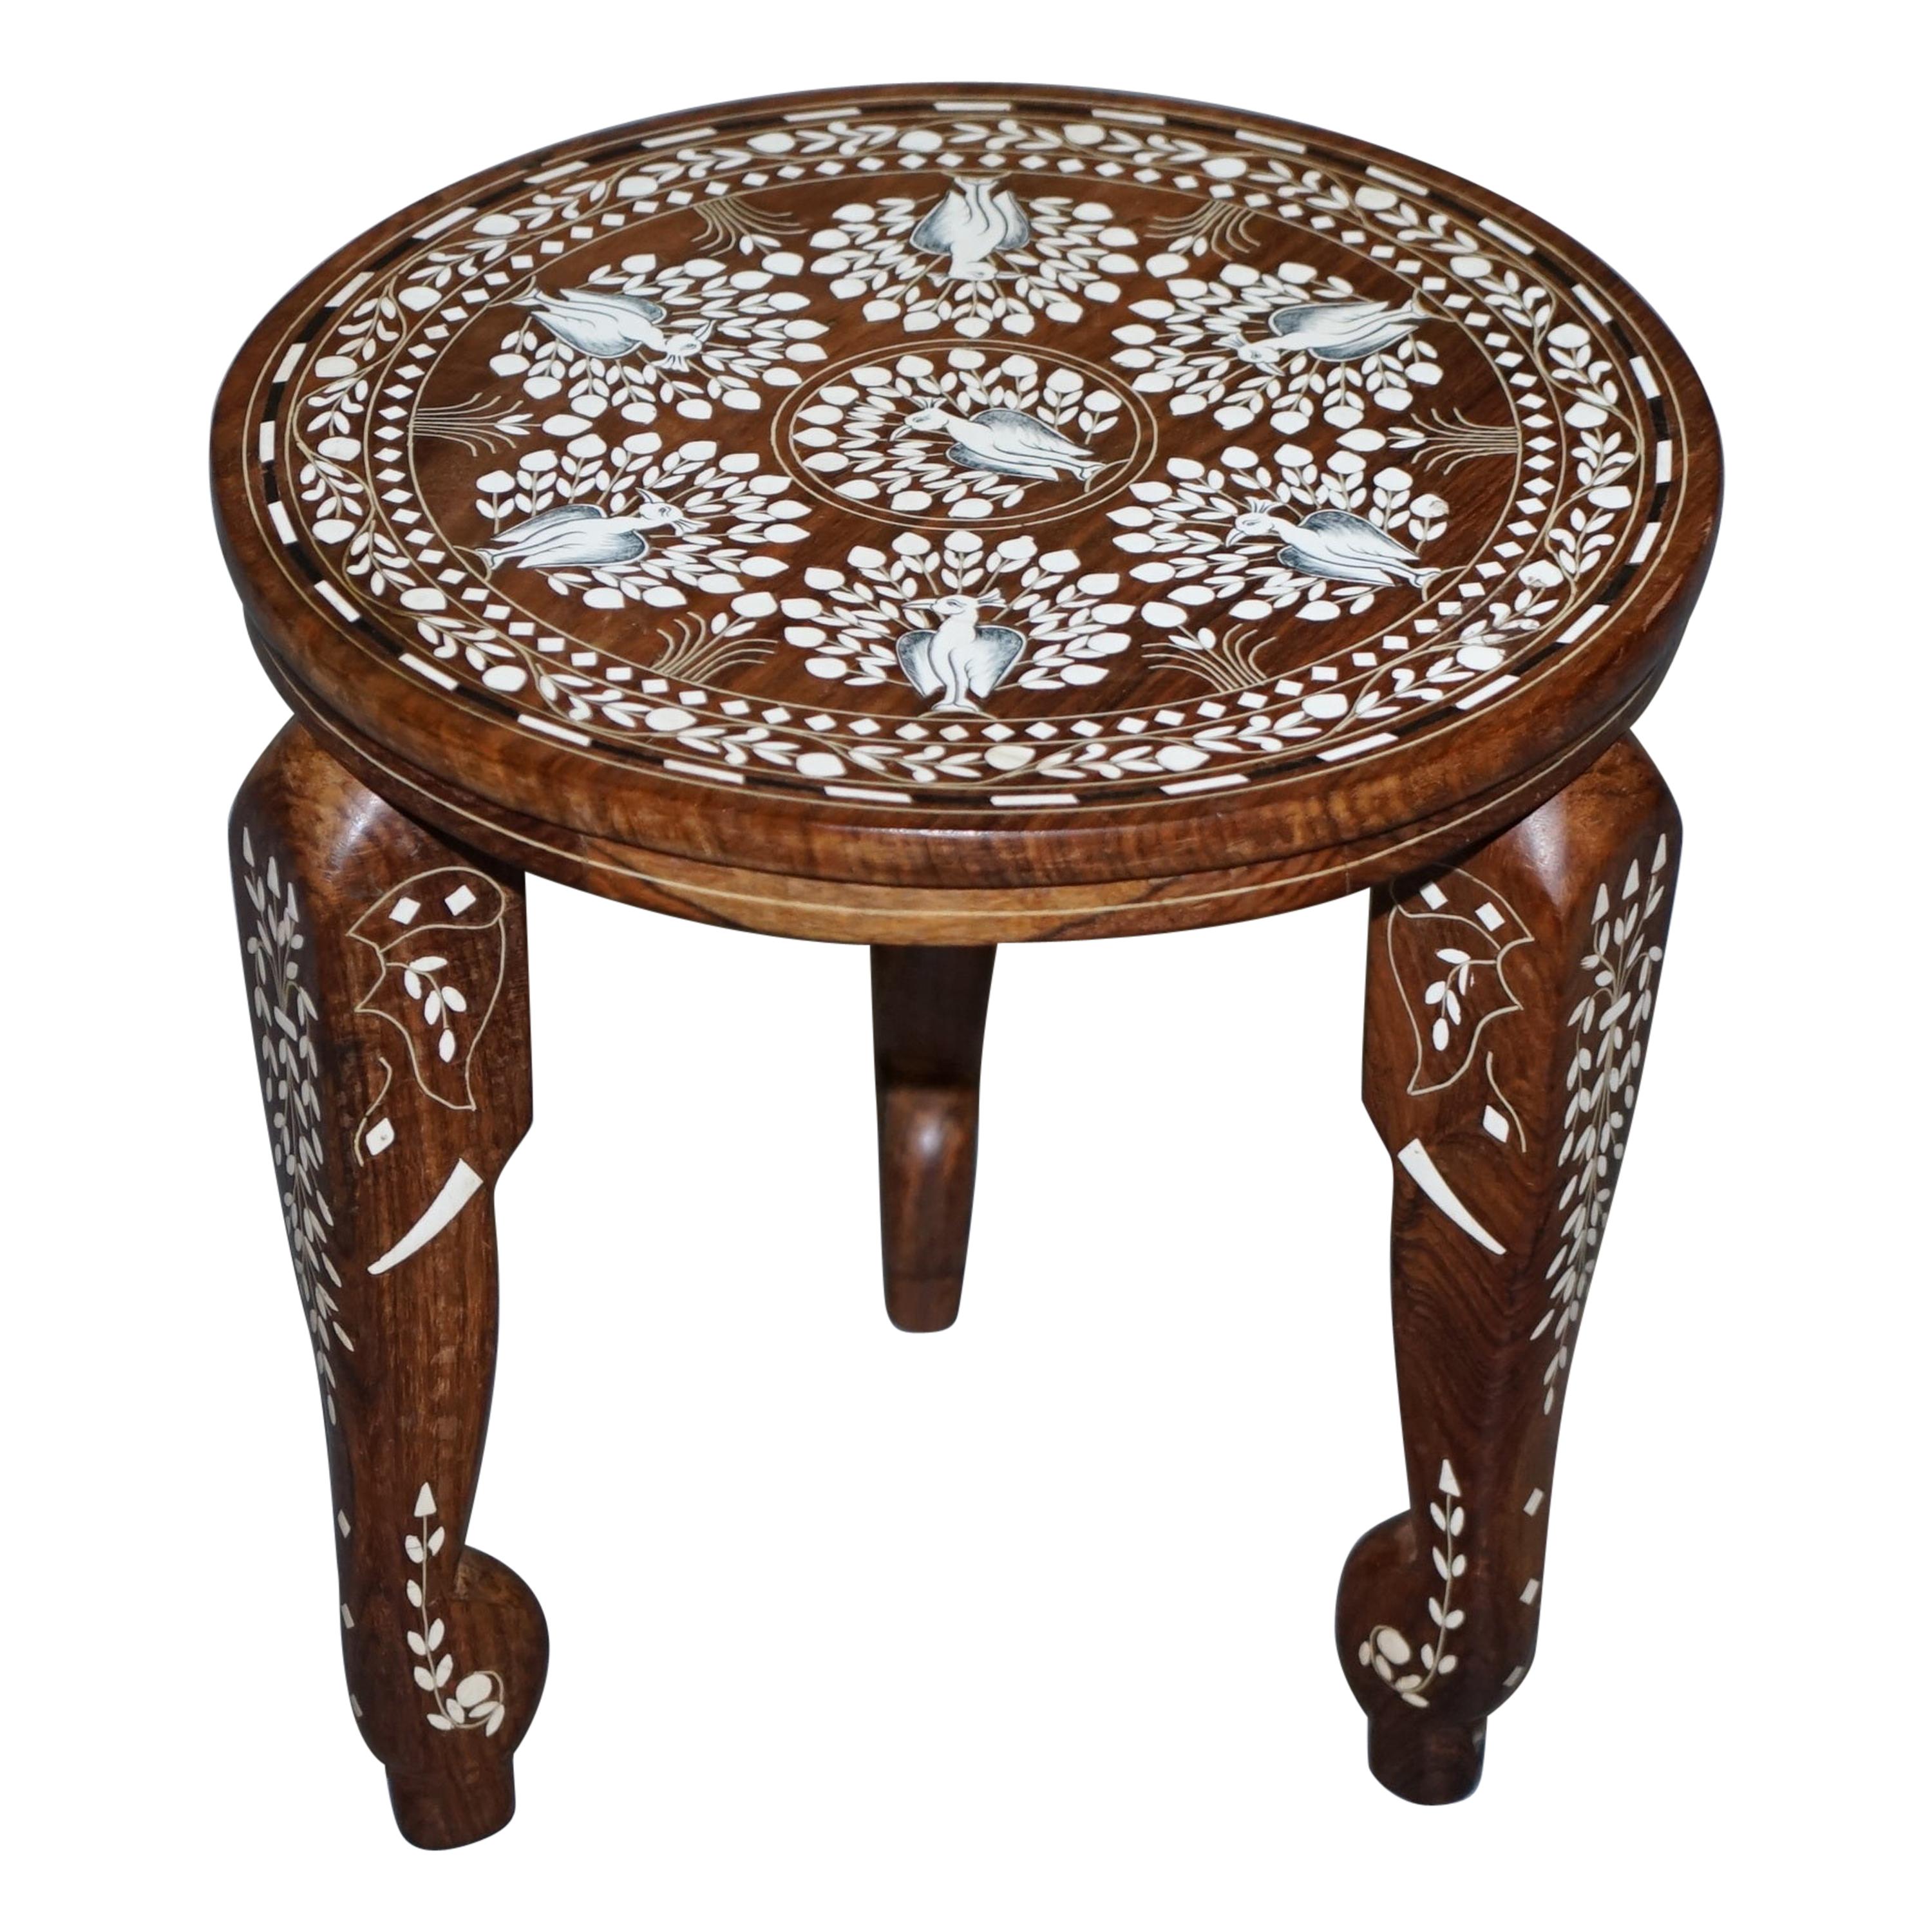 Anglo Indian Export Hardwood Elephant Inlaid Side Lamp End Wine Table Flowers For Sale